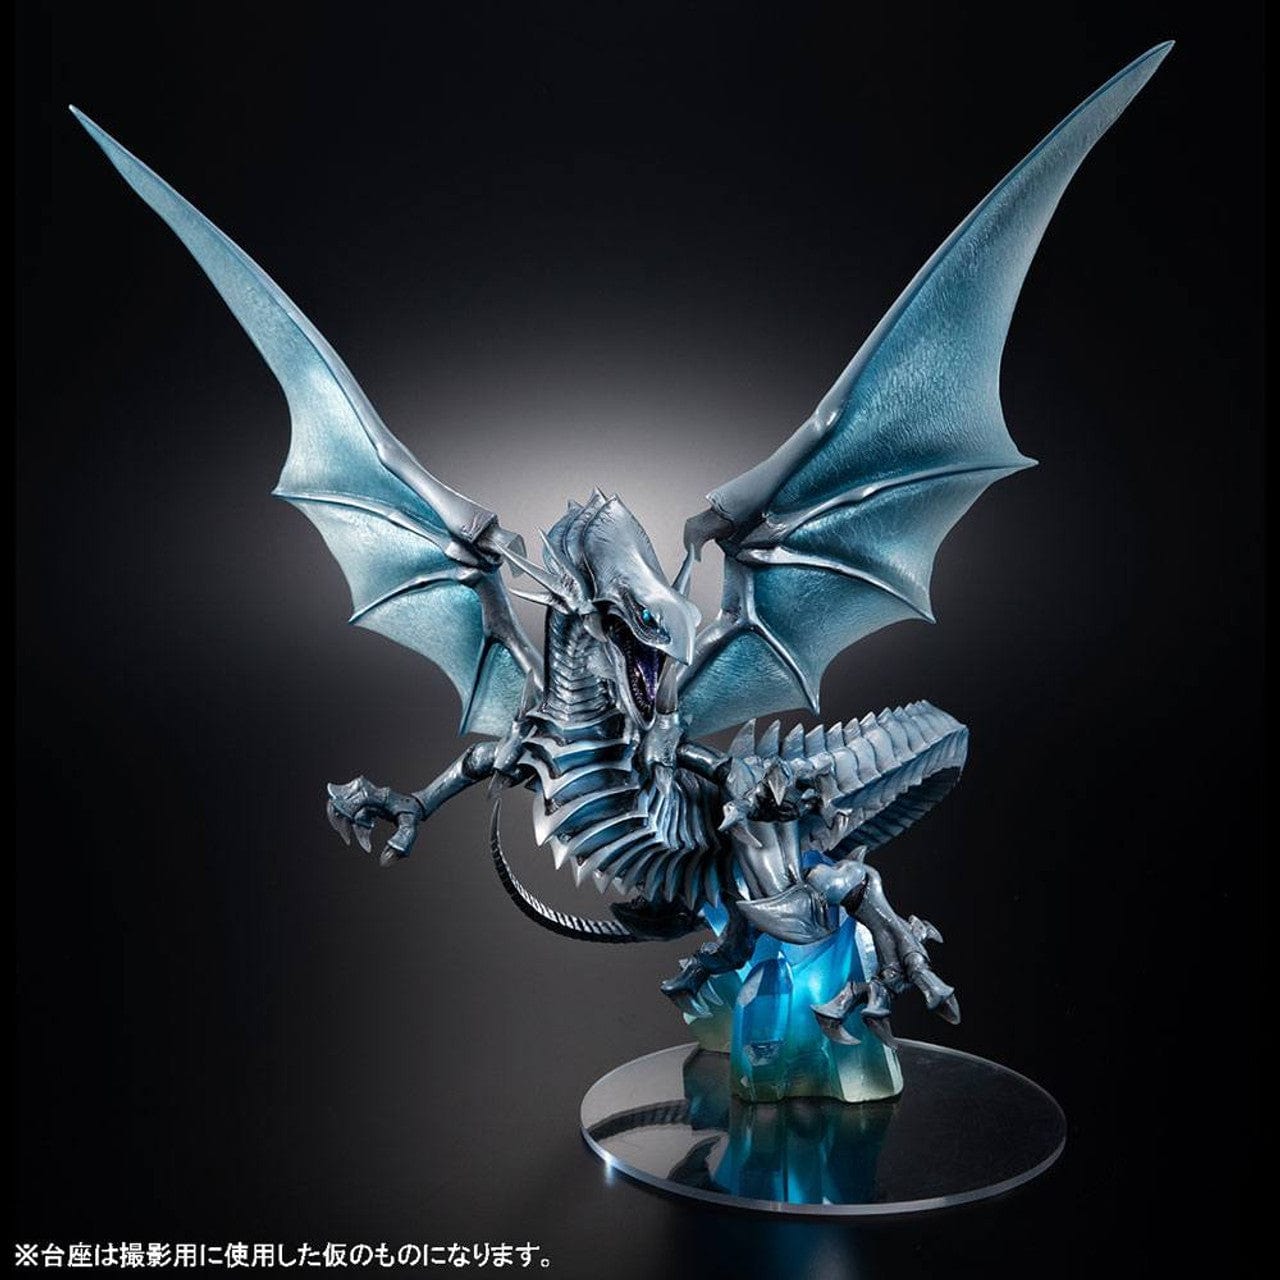 Megahouse Yu-Gi-Oh! Duel Monsters - Blue Eyes White Dragon Holographic Edition